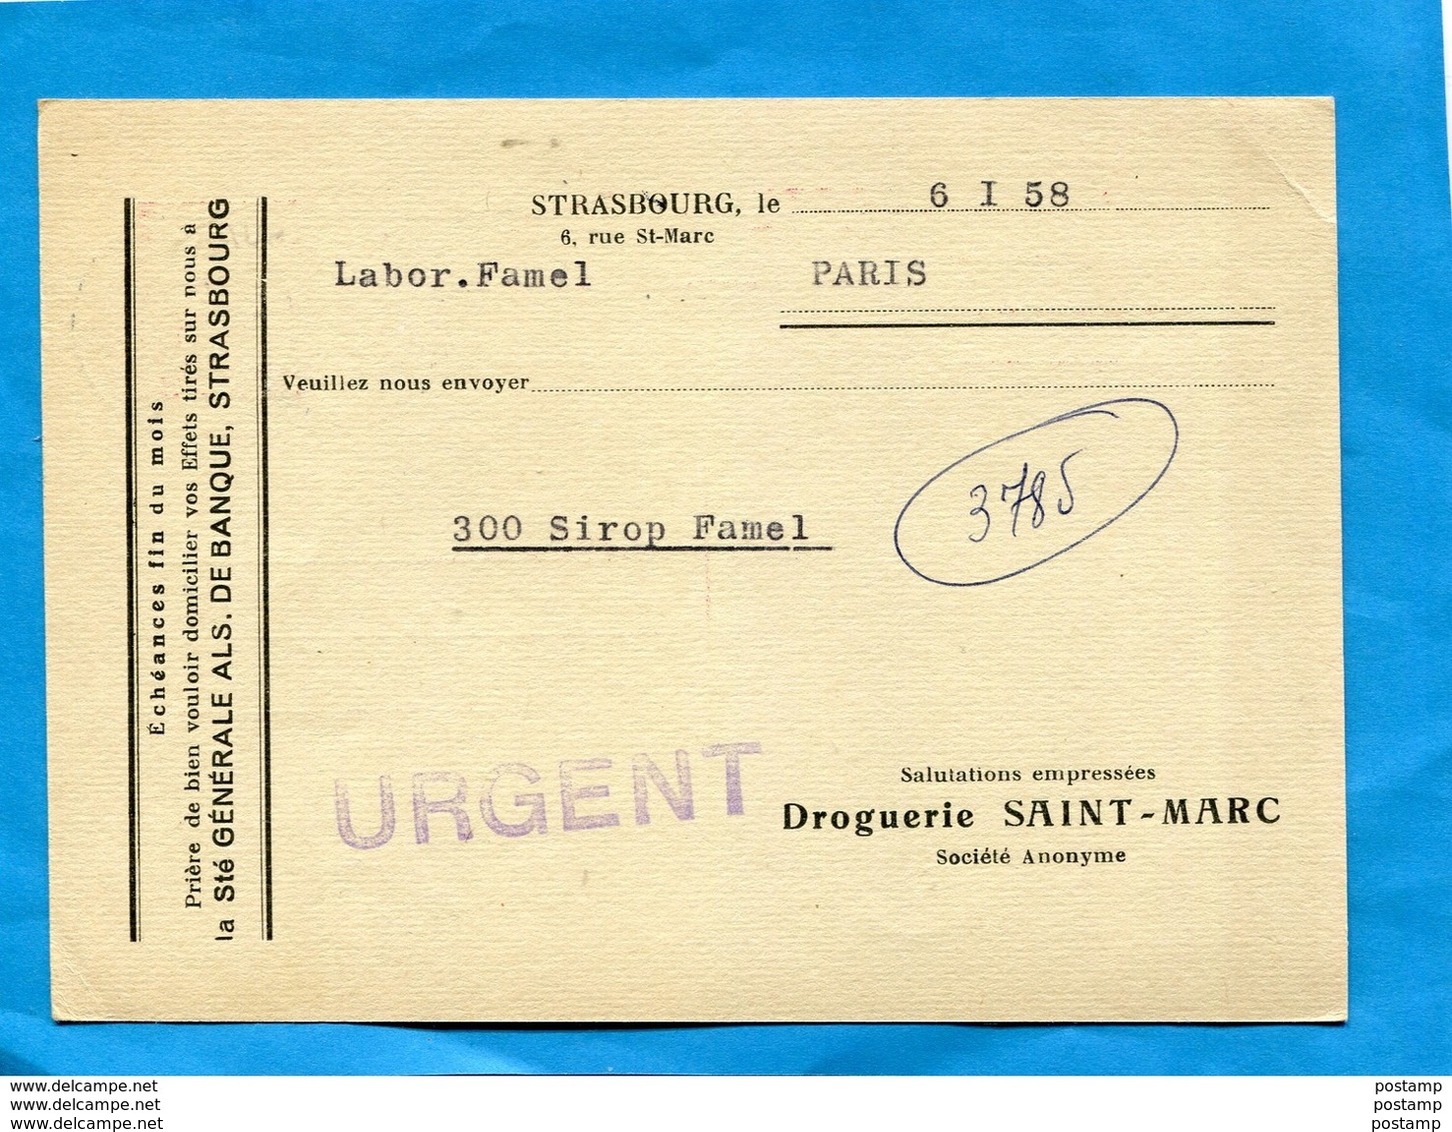 Entier Postal- Stationnery-carte15frs Marianne De Muller-repiq-Droguerie St Marc +flamme1958 STRASBOURG-port - Overprinted Covers (before 1995)